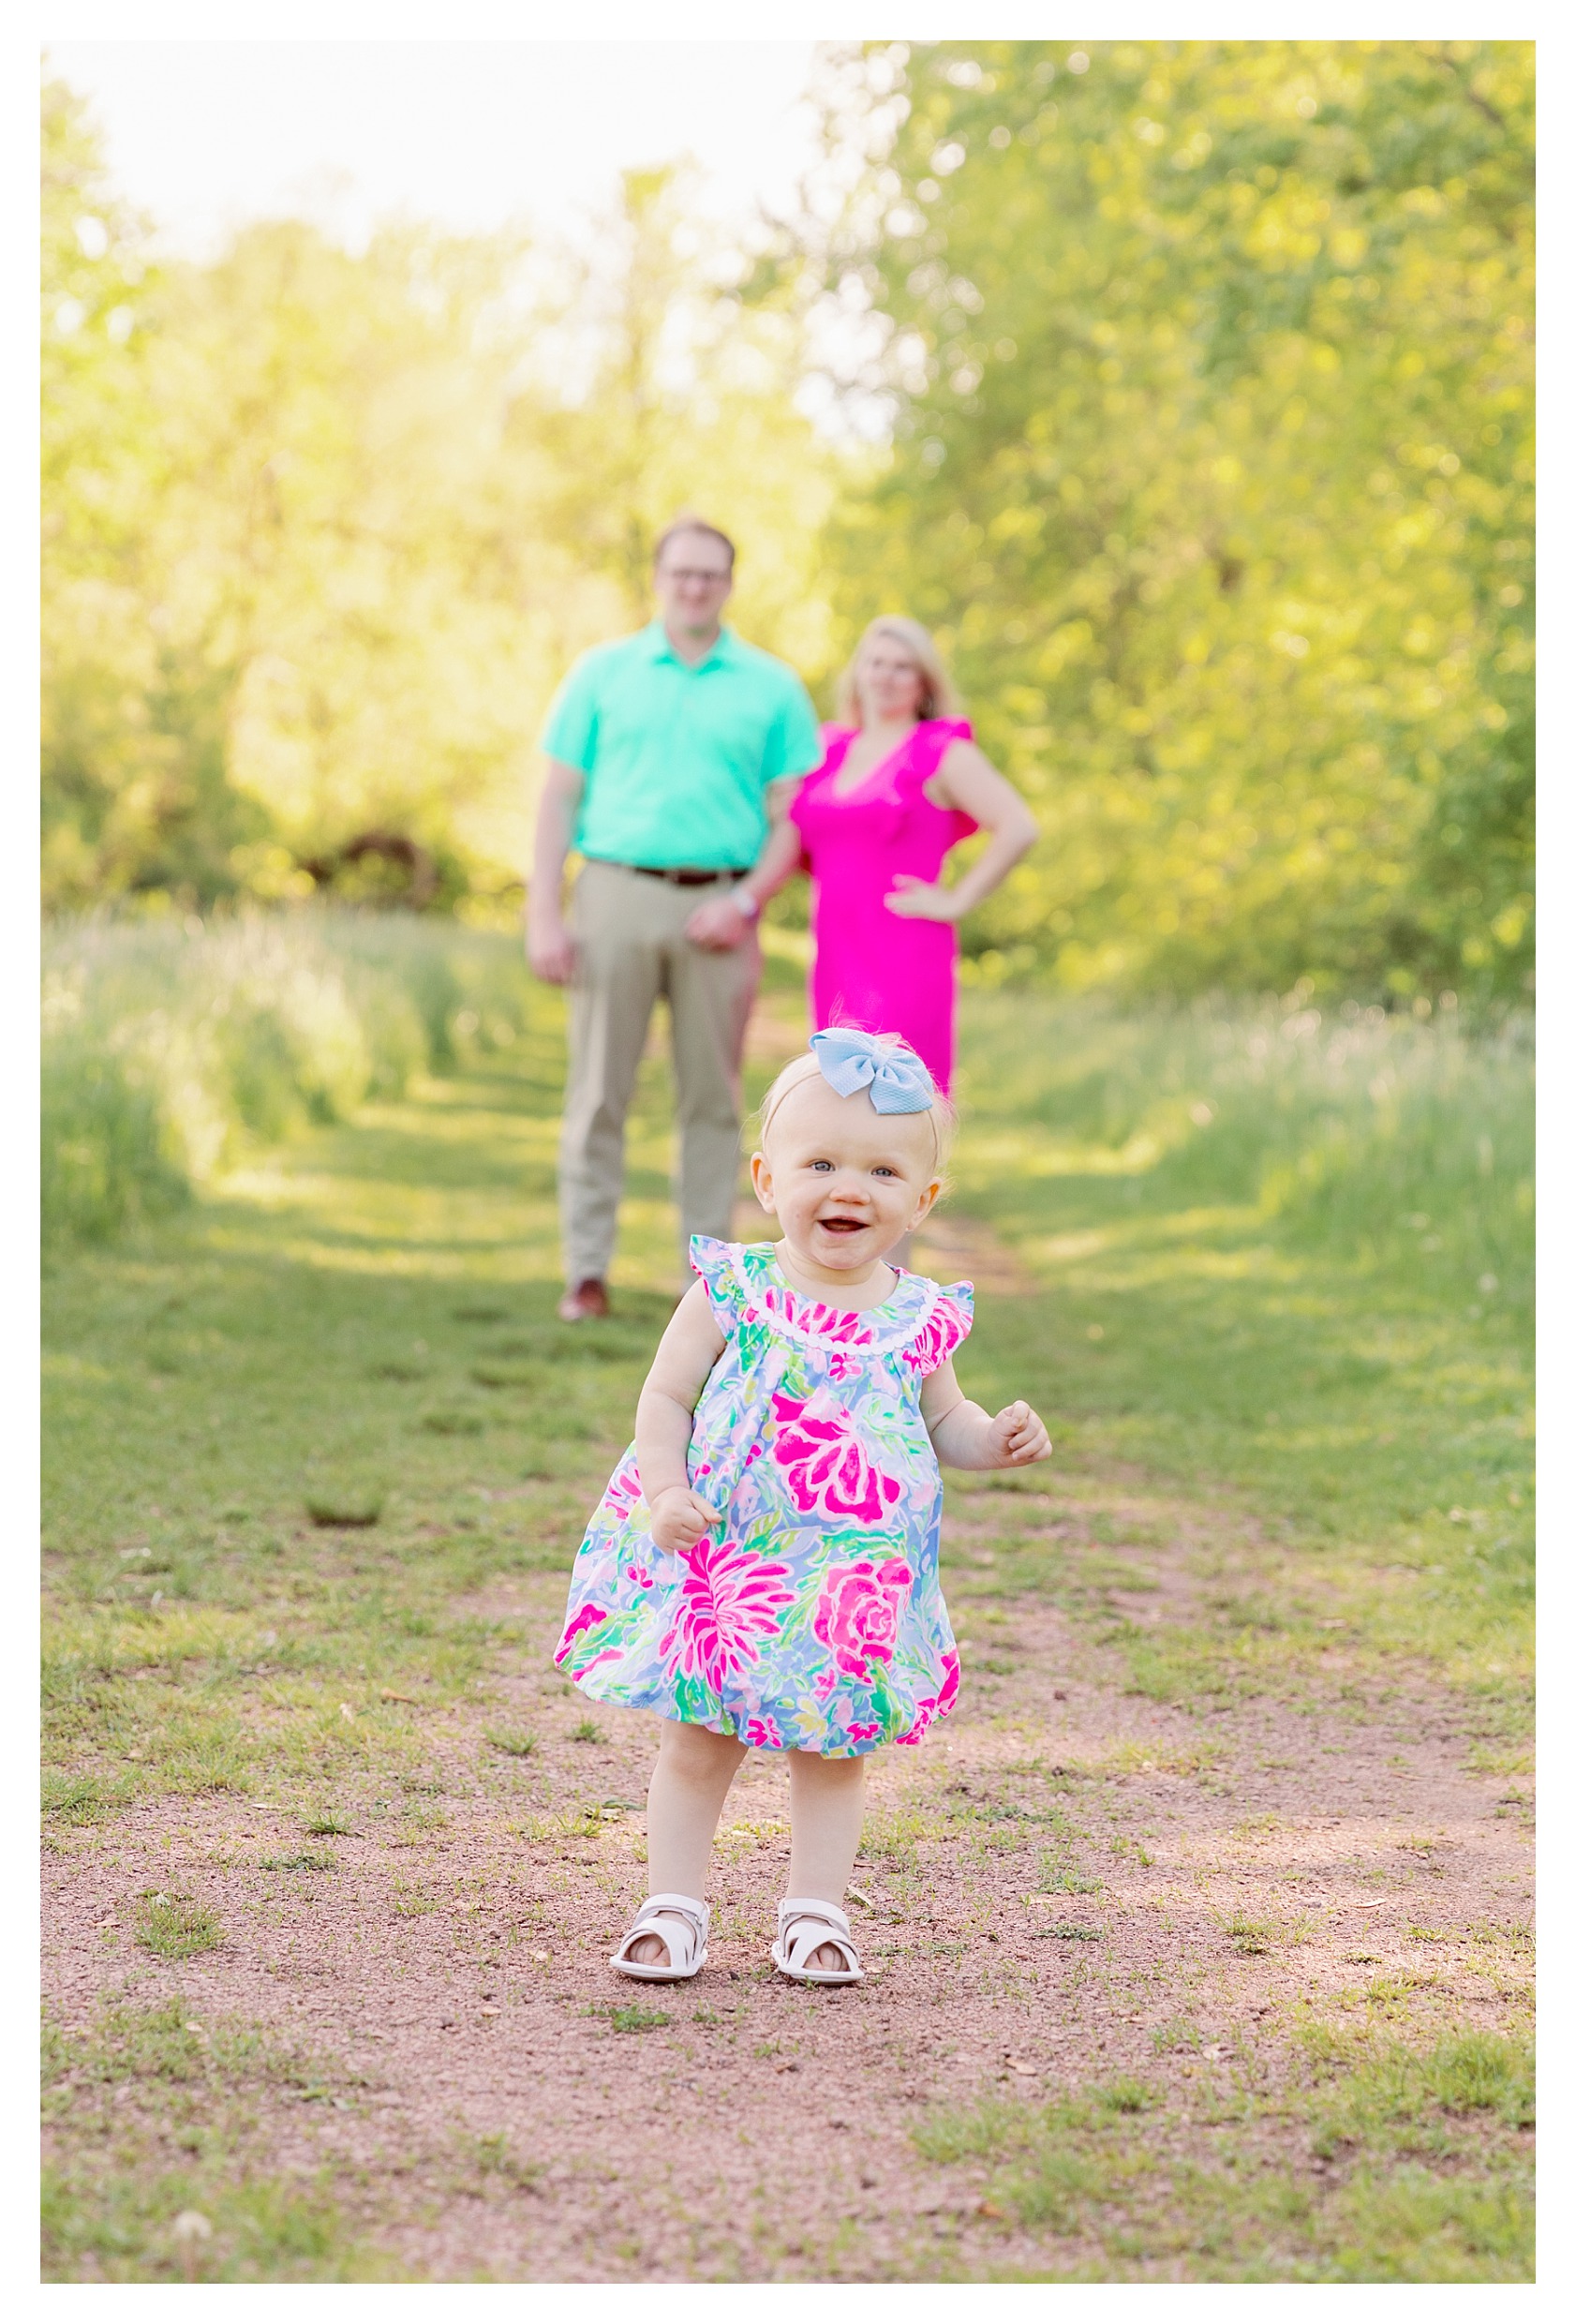 One year old little girl smiles while mom and dad are in background